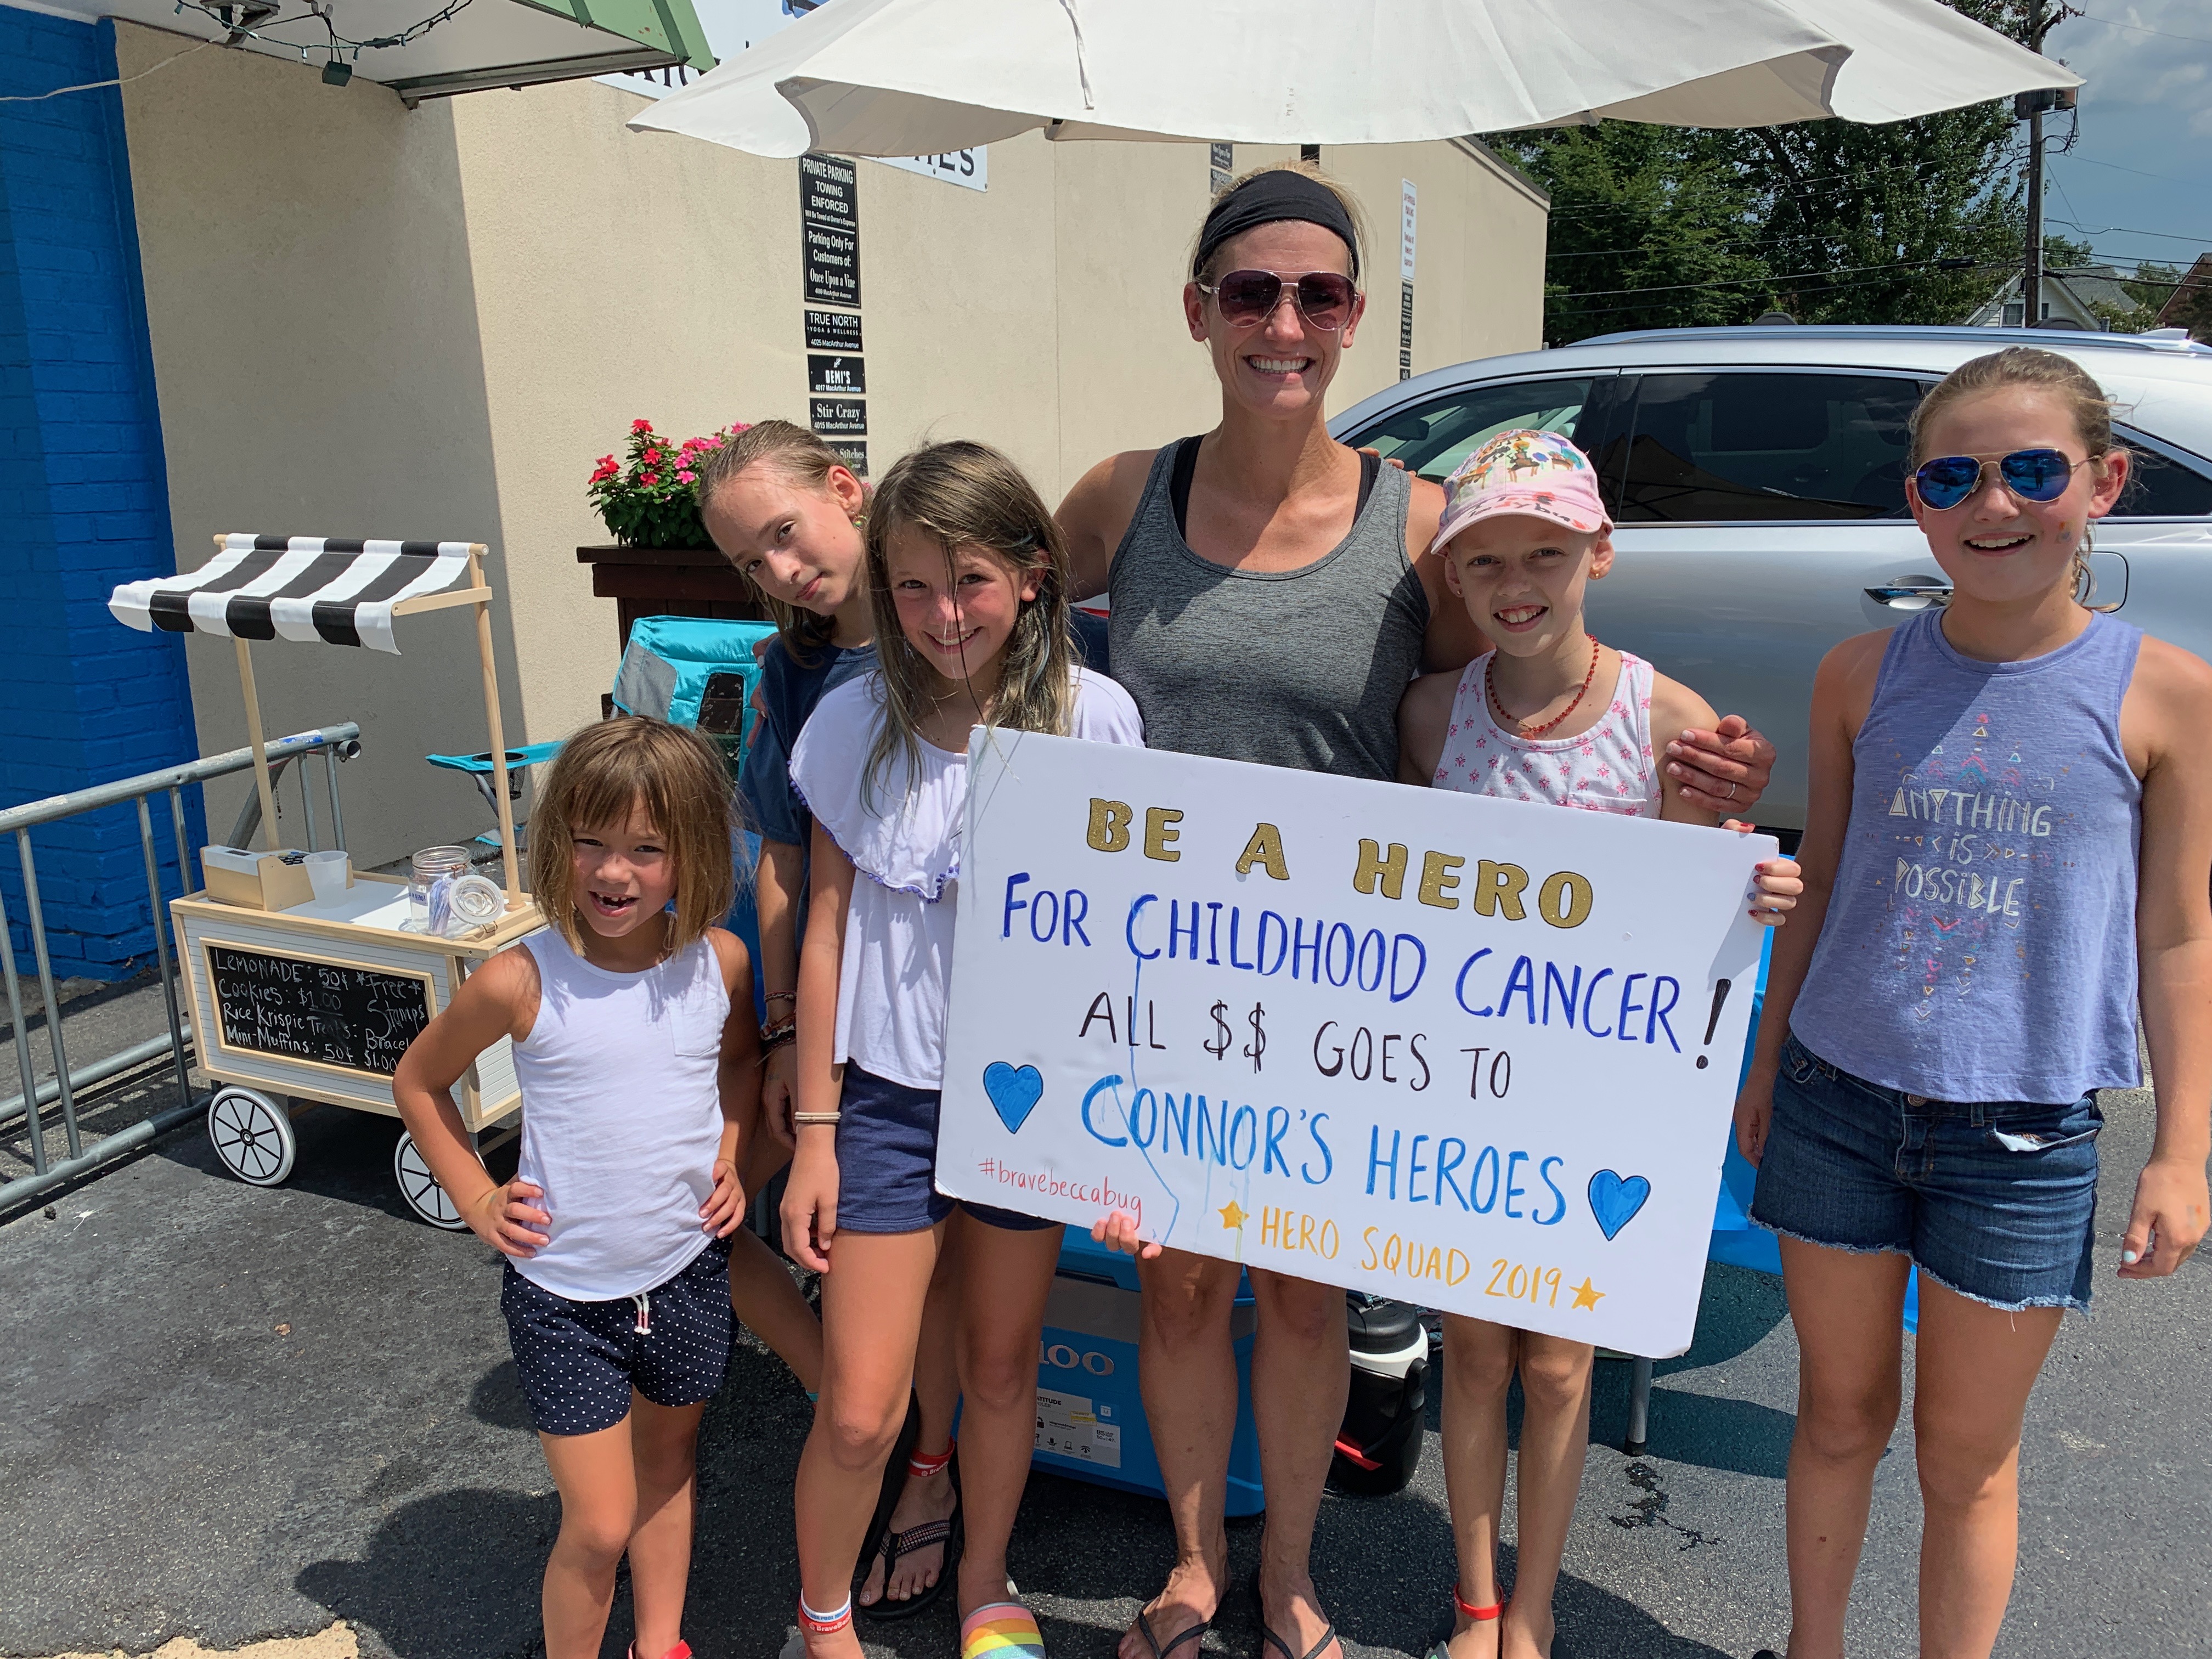 5 kids and one parent holding a sign for their lemonade stand benefiting Connors Heroes